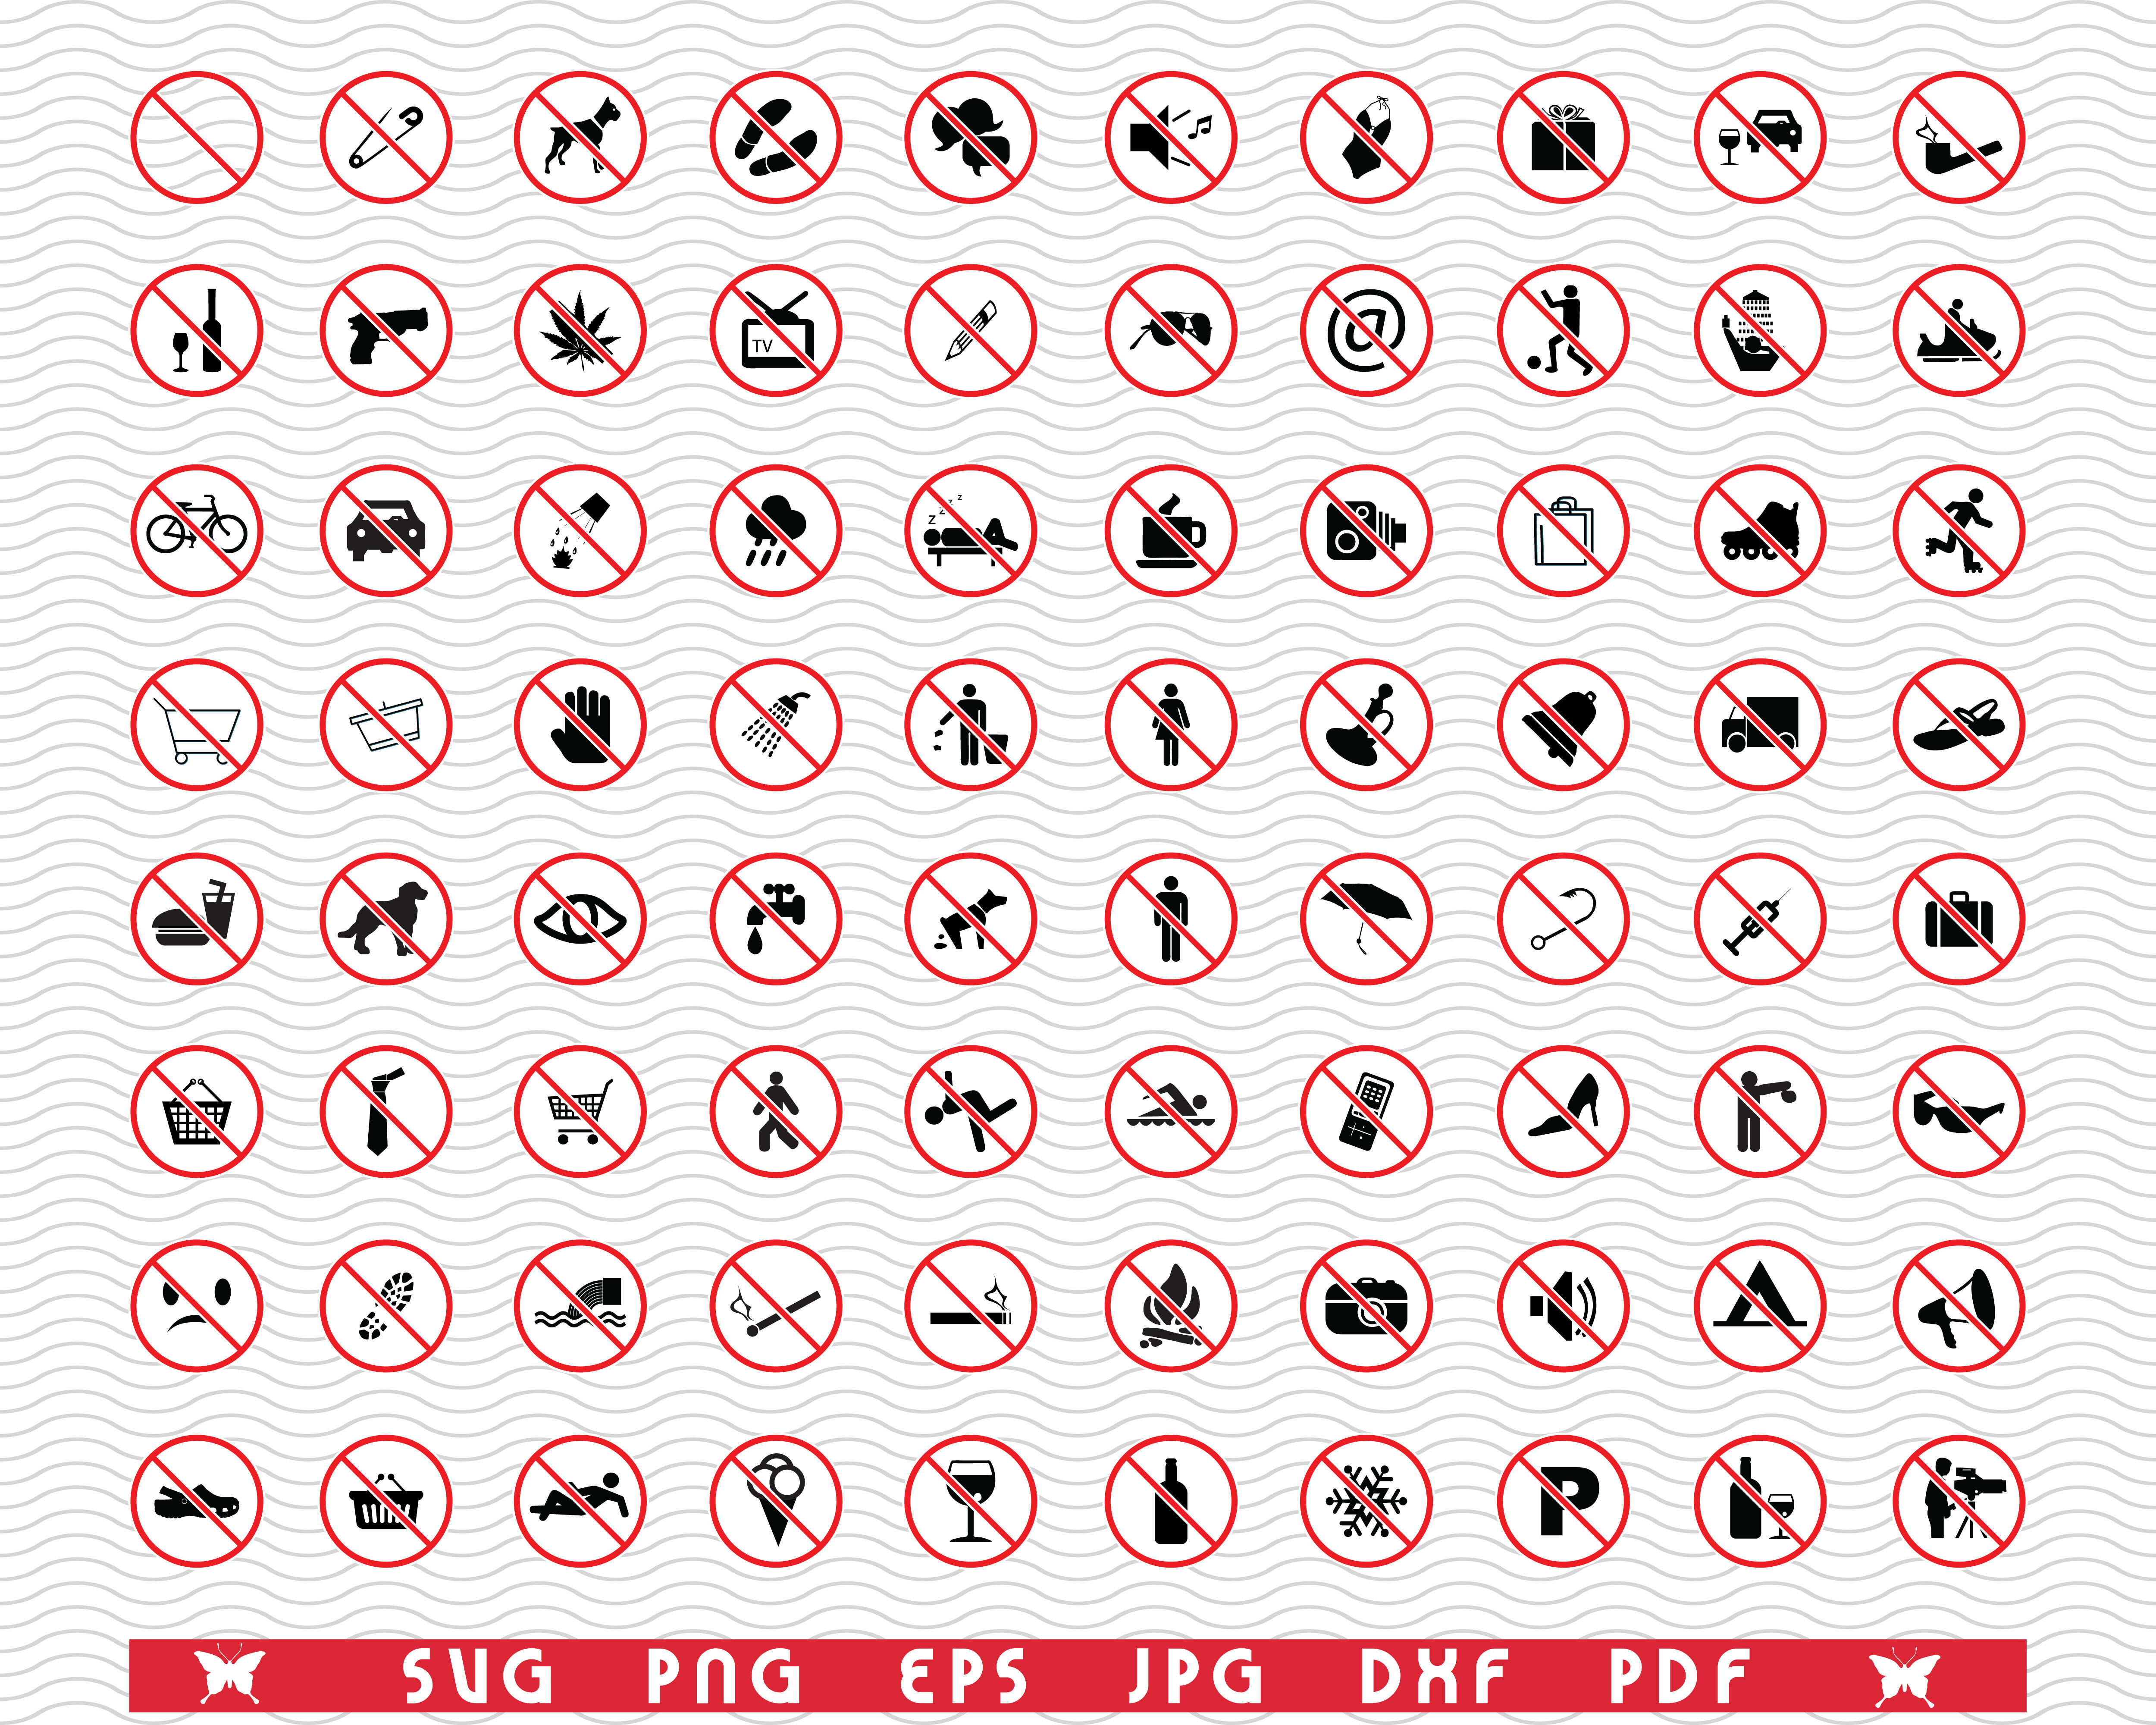 Various Forbidden Signs Royalty Free SVG, Cliparts, Vectors, and Stock  Illustration. Image 3457965.